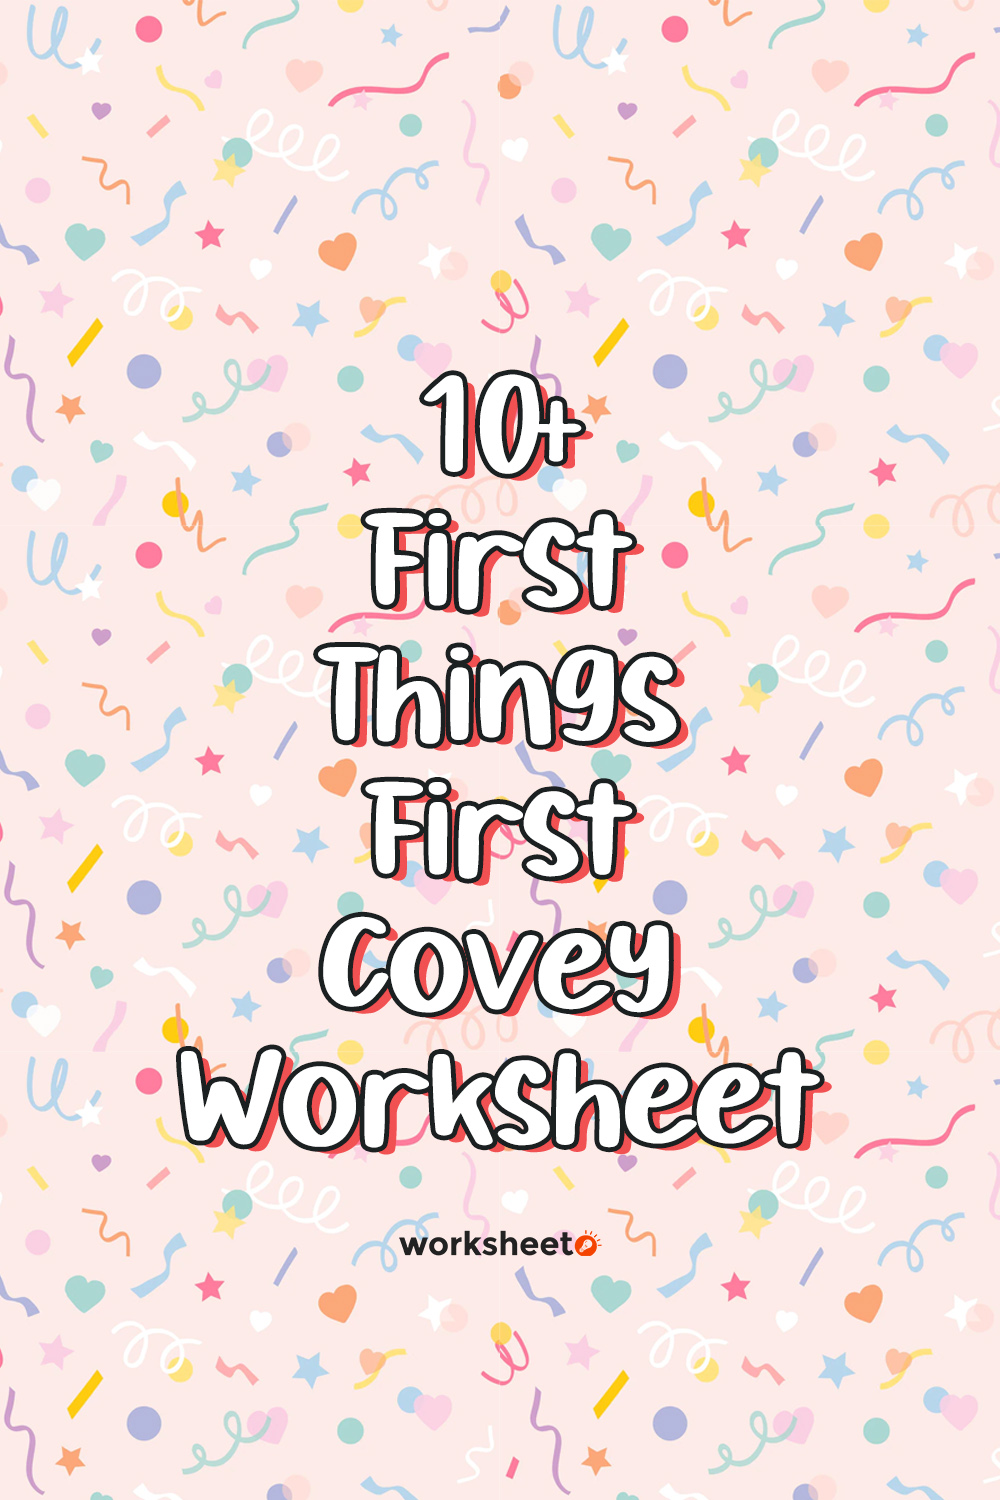 17 Images of First Things First Covey Worksheet